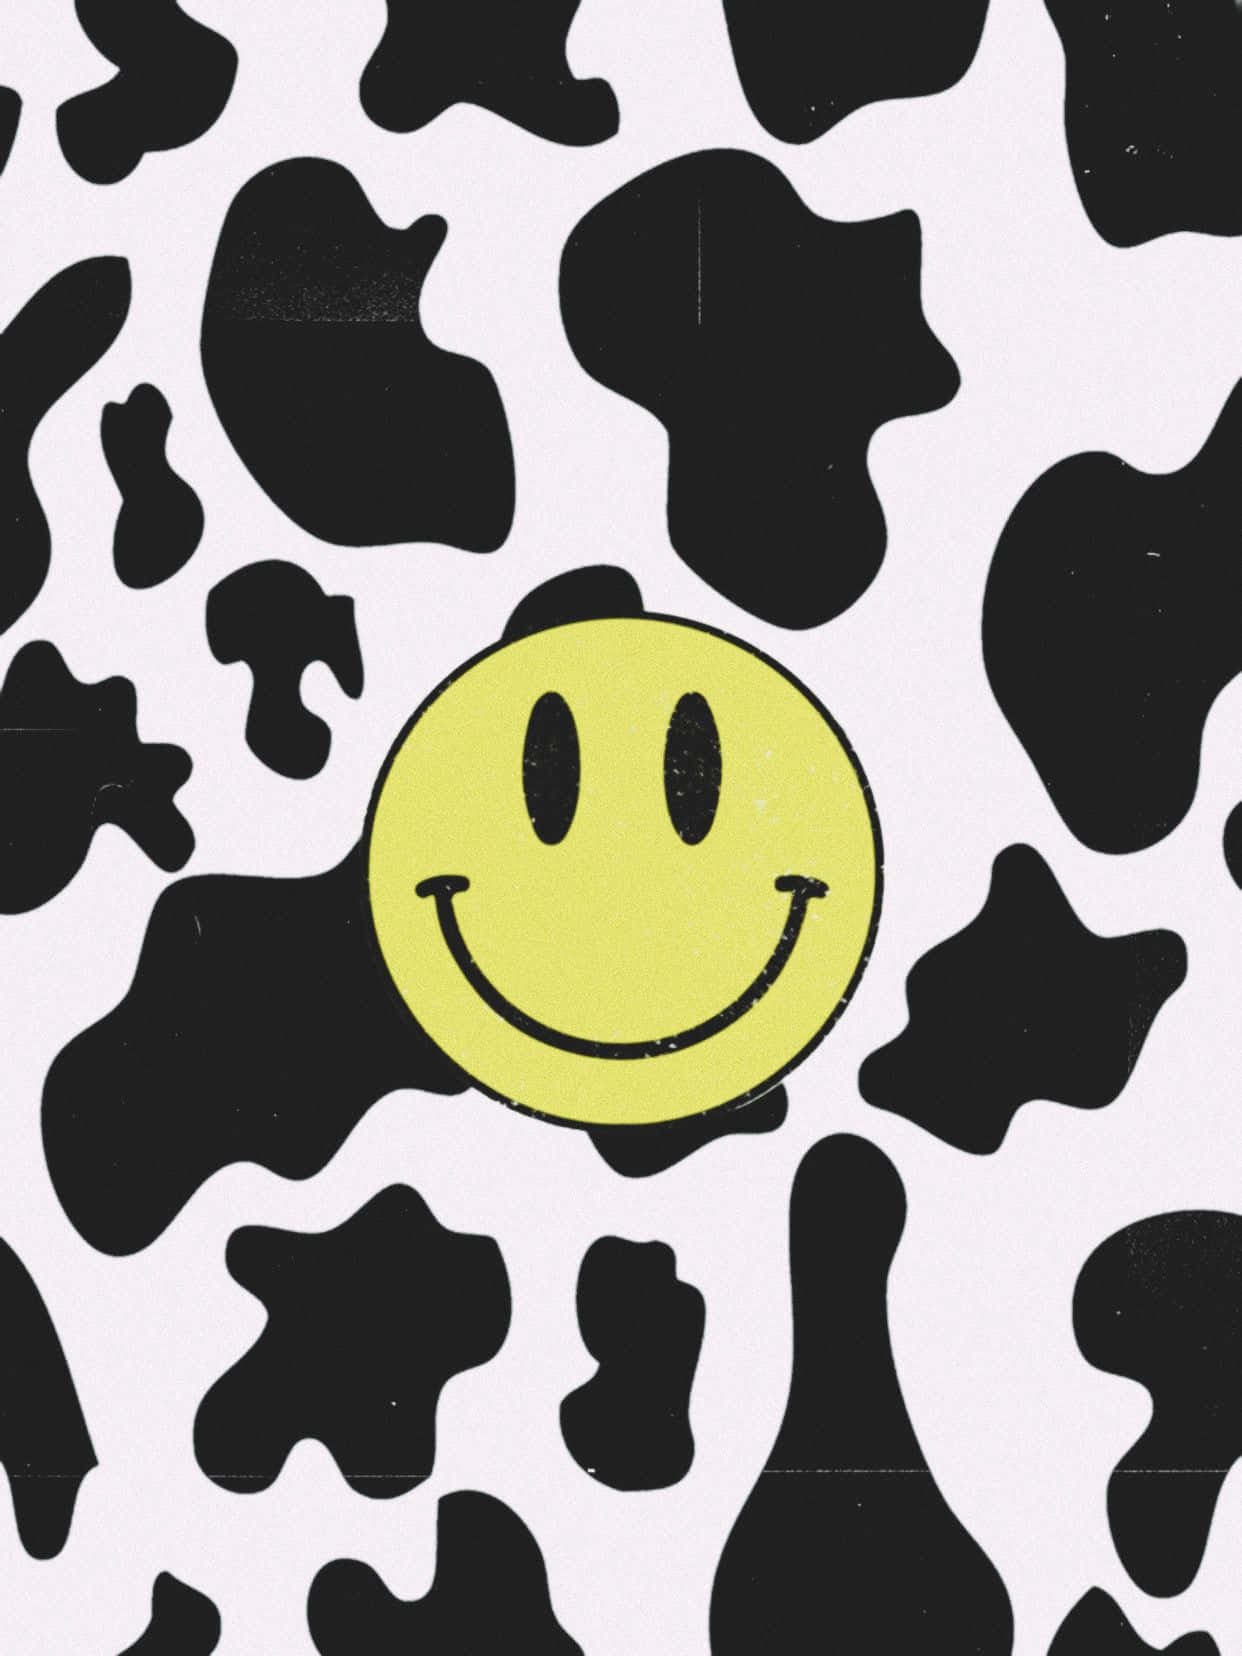 Check Out The New & Stylish Cow Themed Iphone Wallpaper